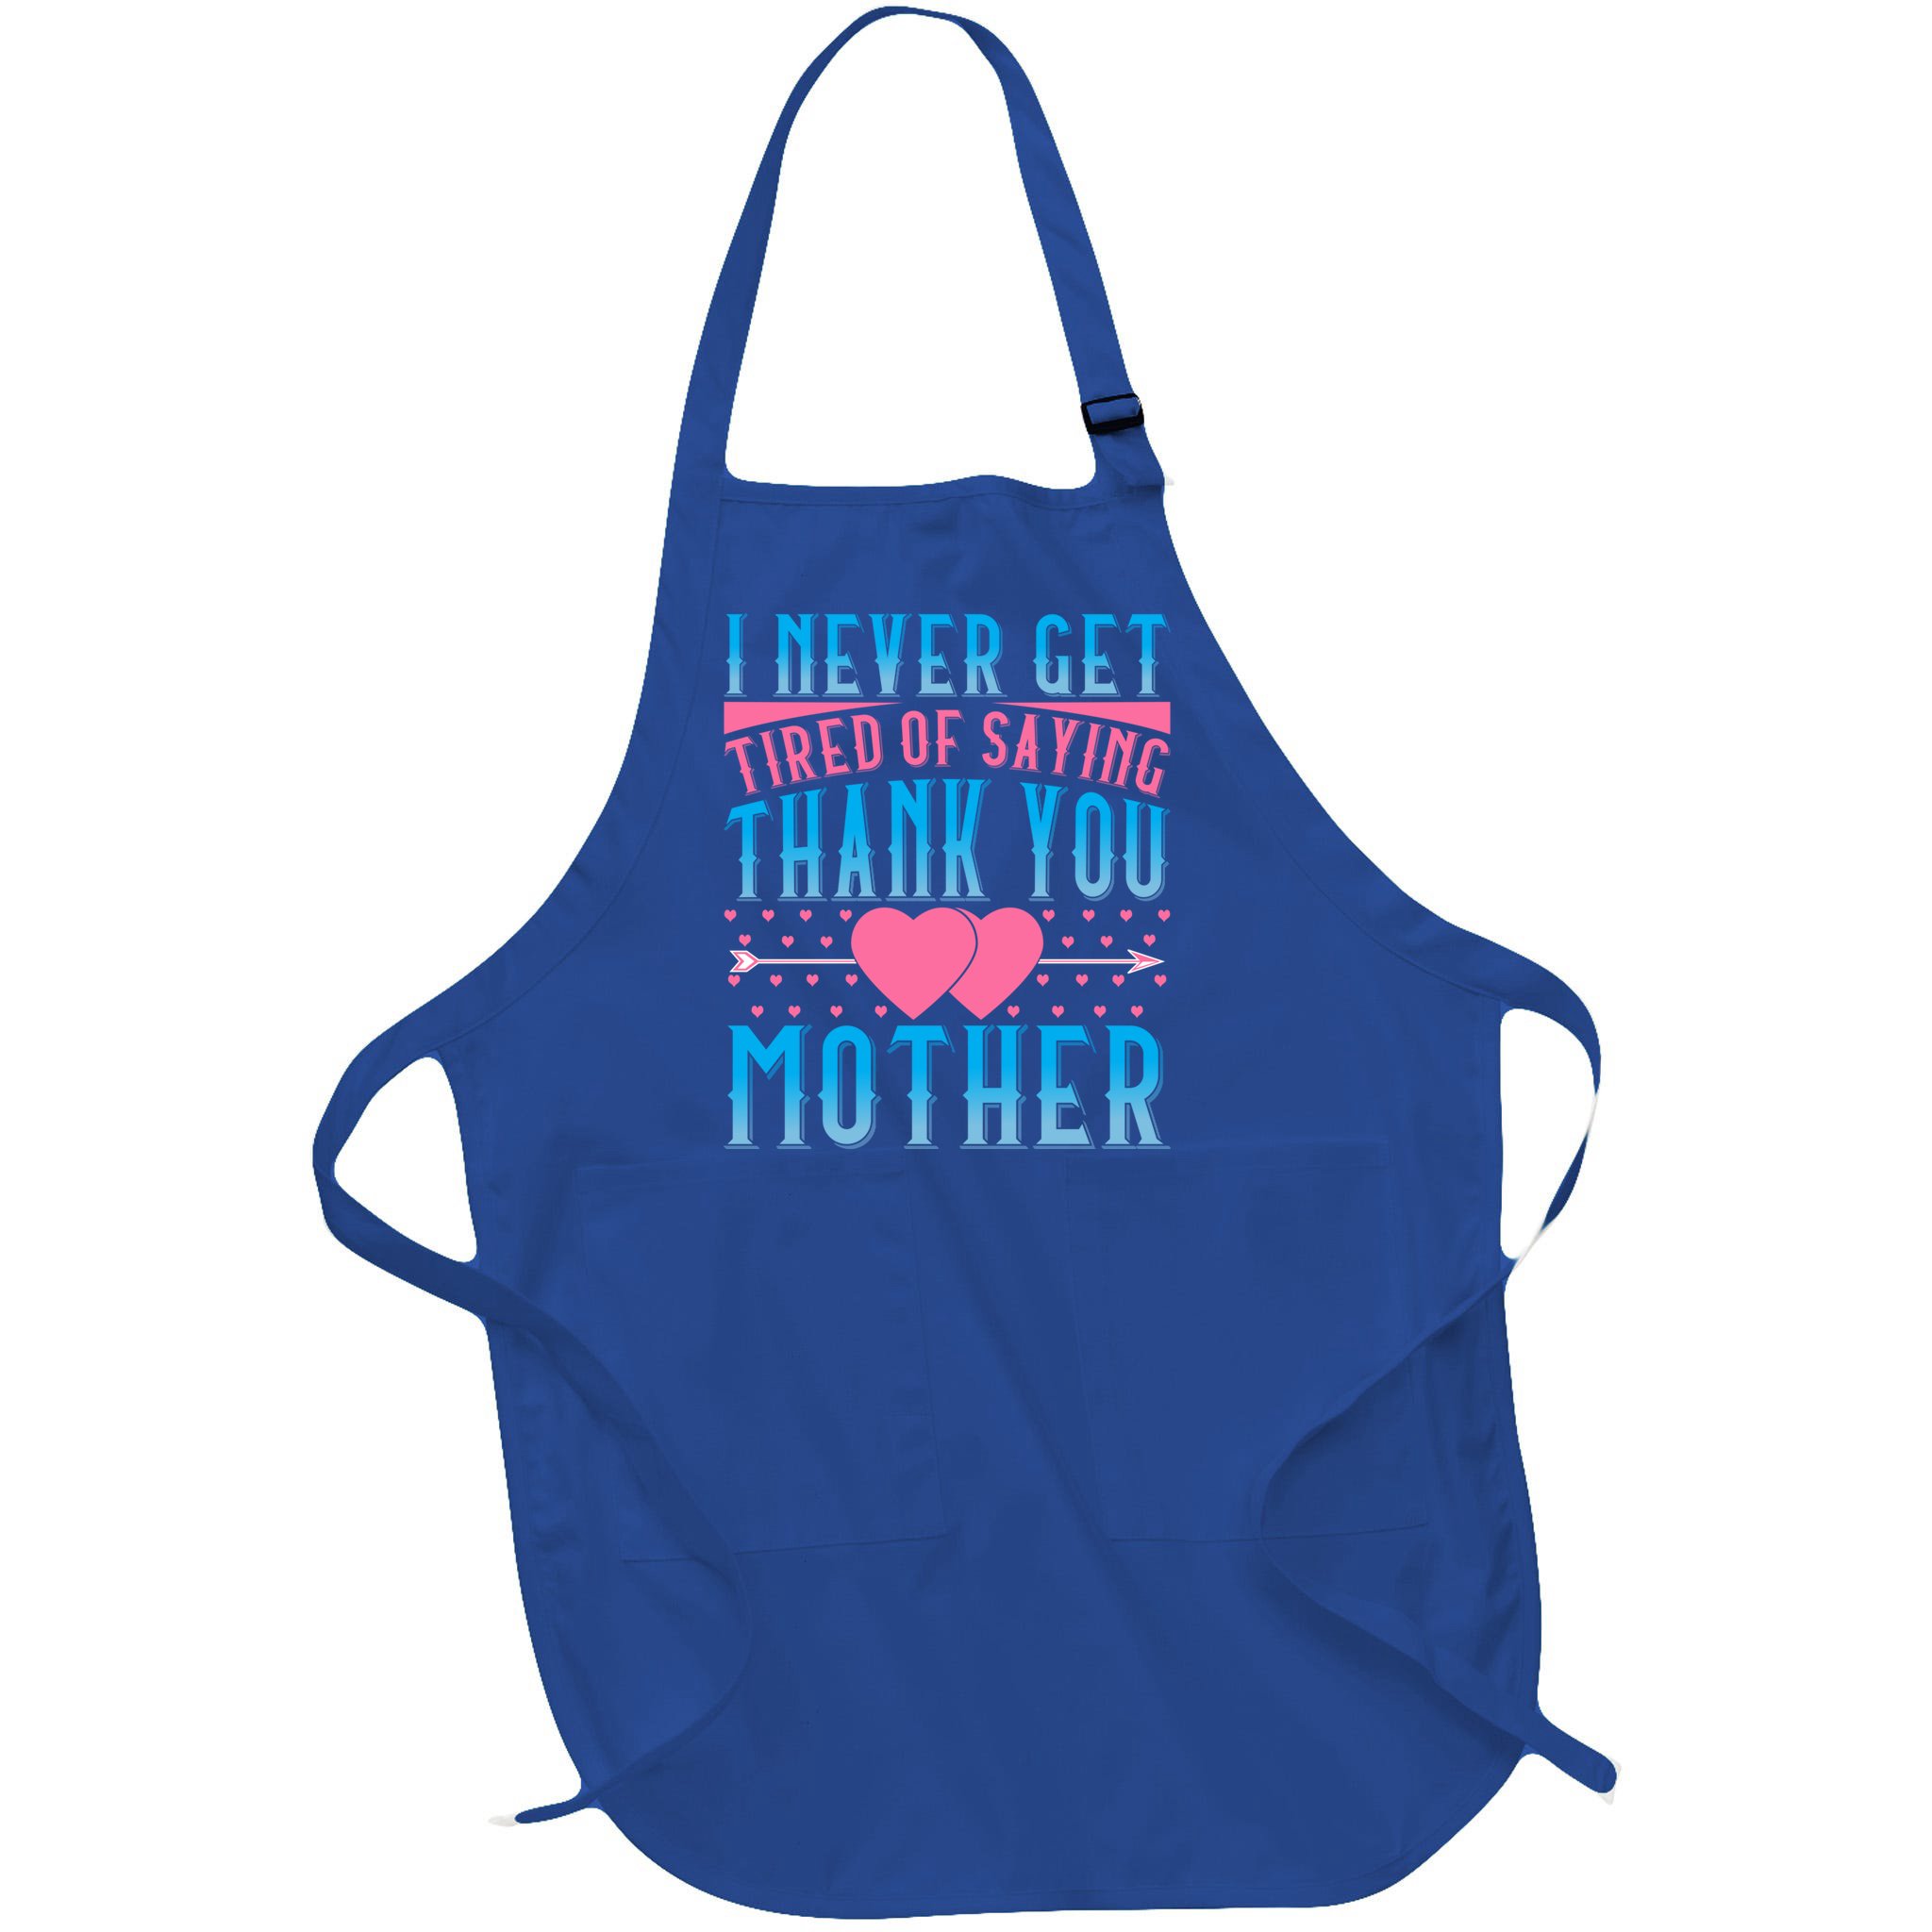 https://images3.teeshirtpalace.com/images/productImages/mdg2336519-mothers-day-graphic-with-sayings-mom-daughter-son-thank-you-gift--blue-apon-garment.jpg